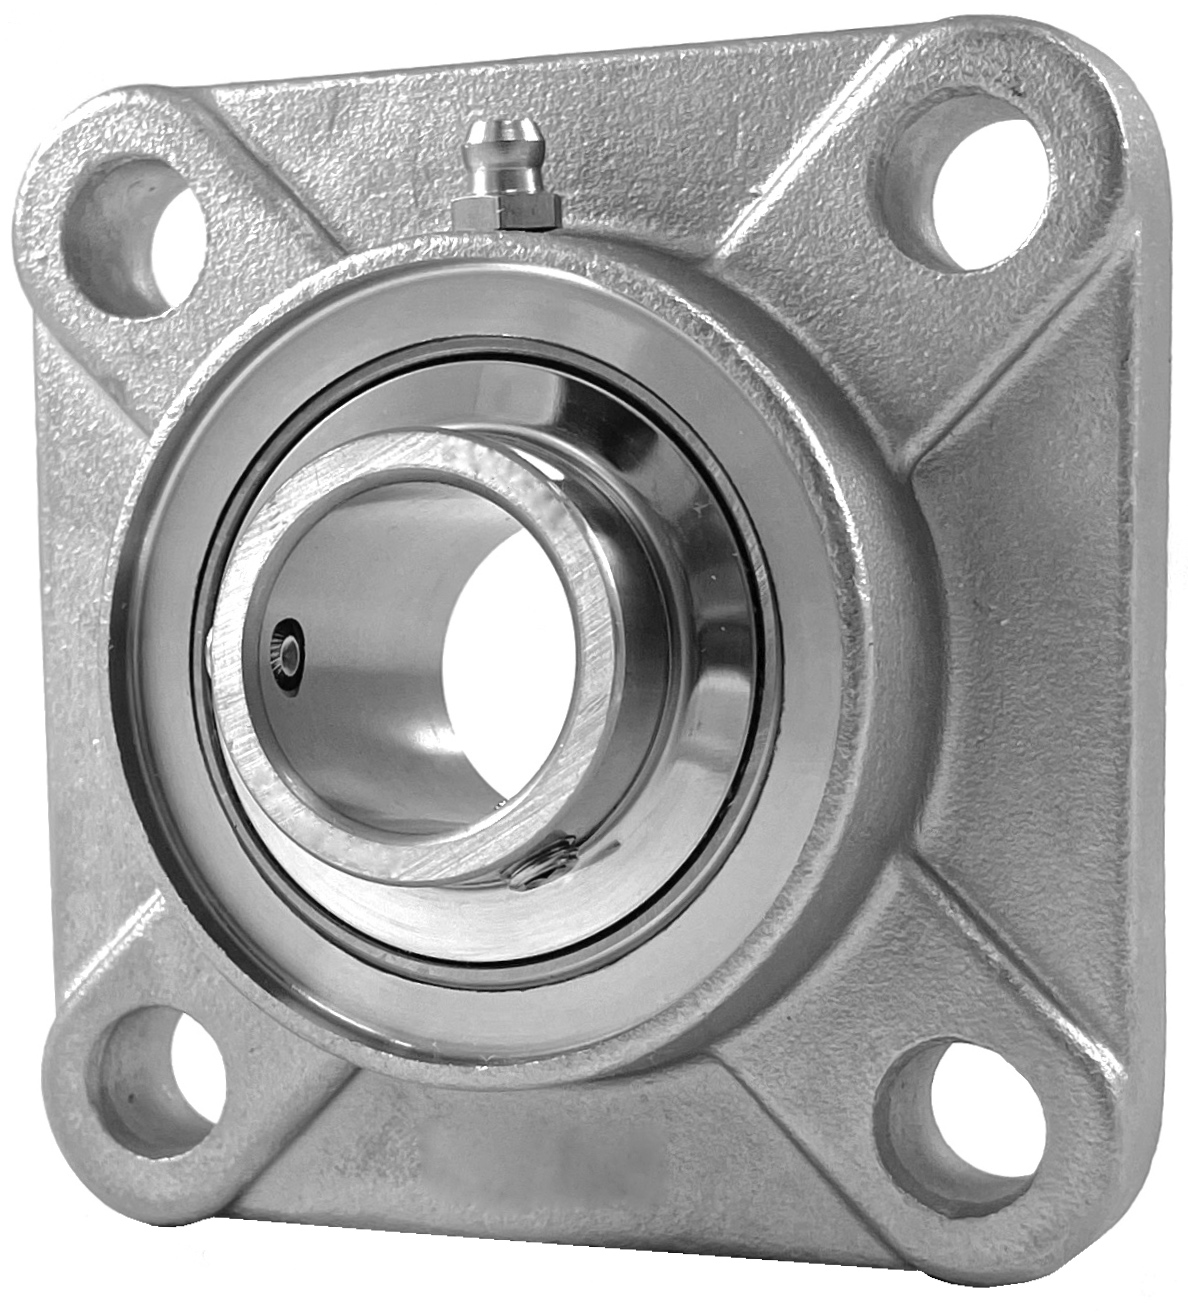 Premium SUCSF210-32 2" Stainless Steel 4-Bolt Flange Bearing Solid Base 